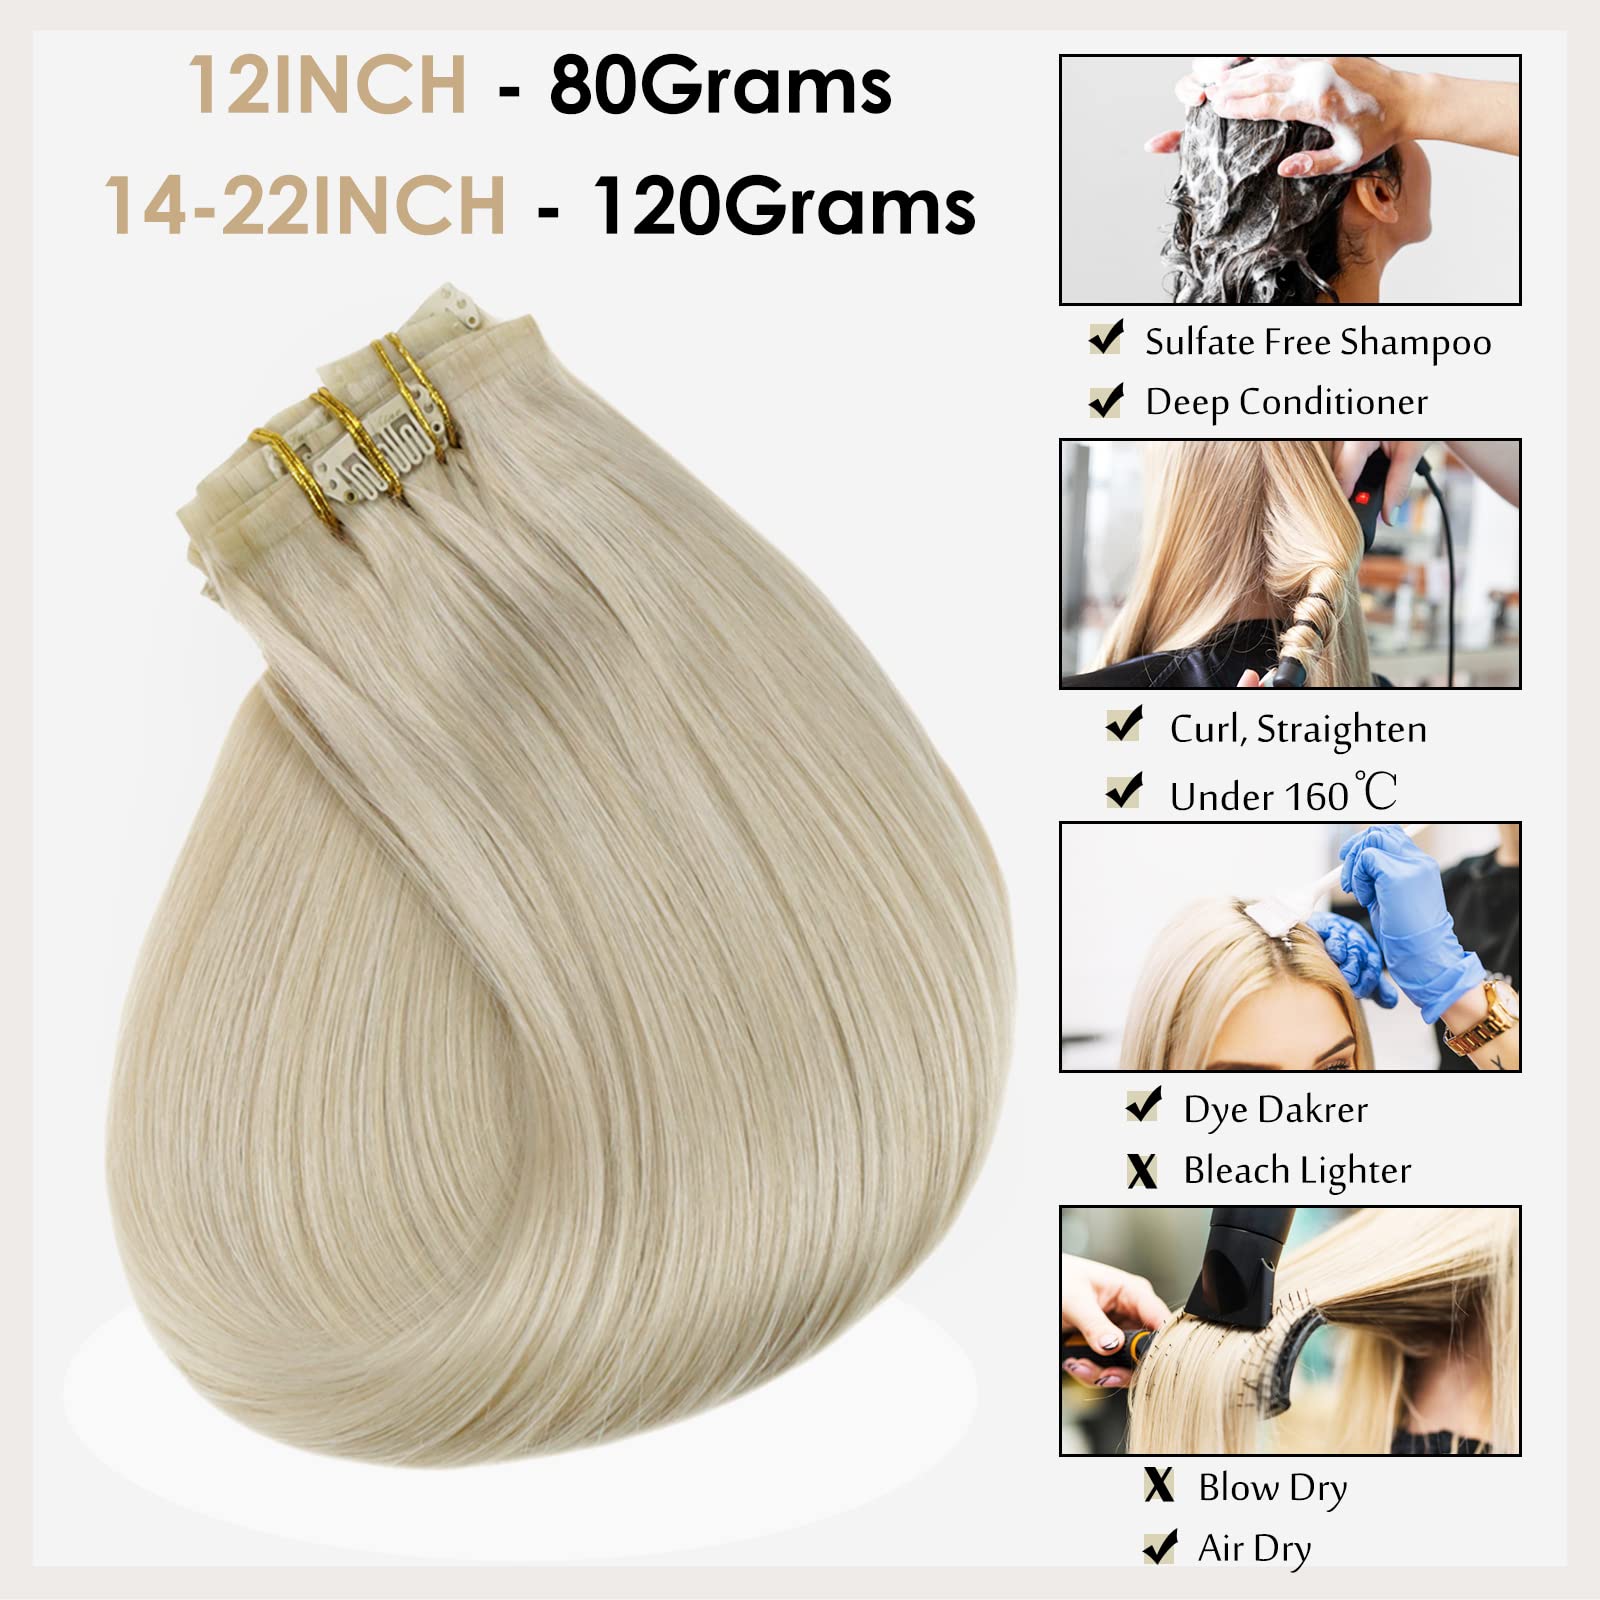 Full Shine Blonde Hair Clip in Hair Extensions Platinum Blonde Clip in Extensions Real Human Hair Invisible Pu Weft 8Pcs Straigt Natural Blonde Hair Clip in Hair 120 Grams 18 Inch